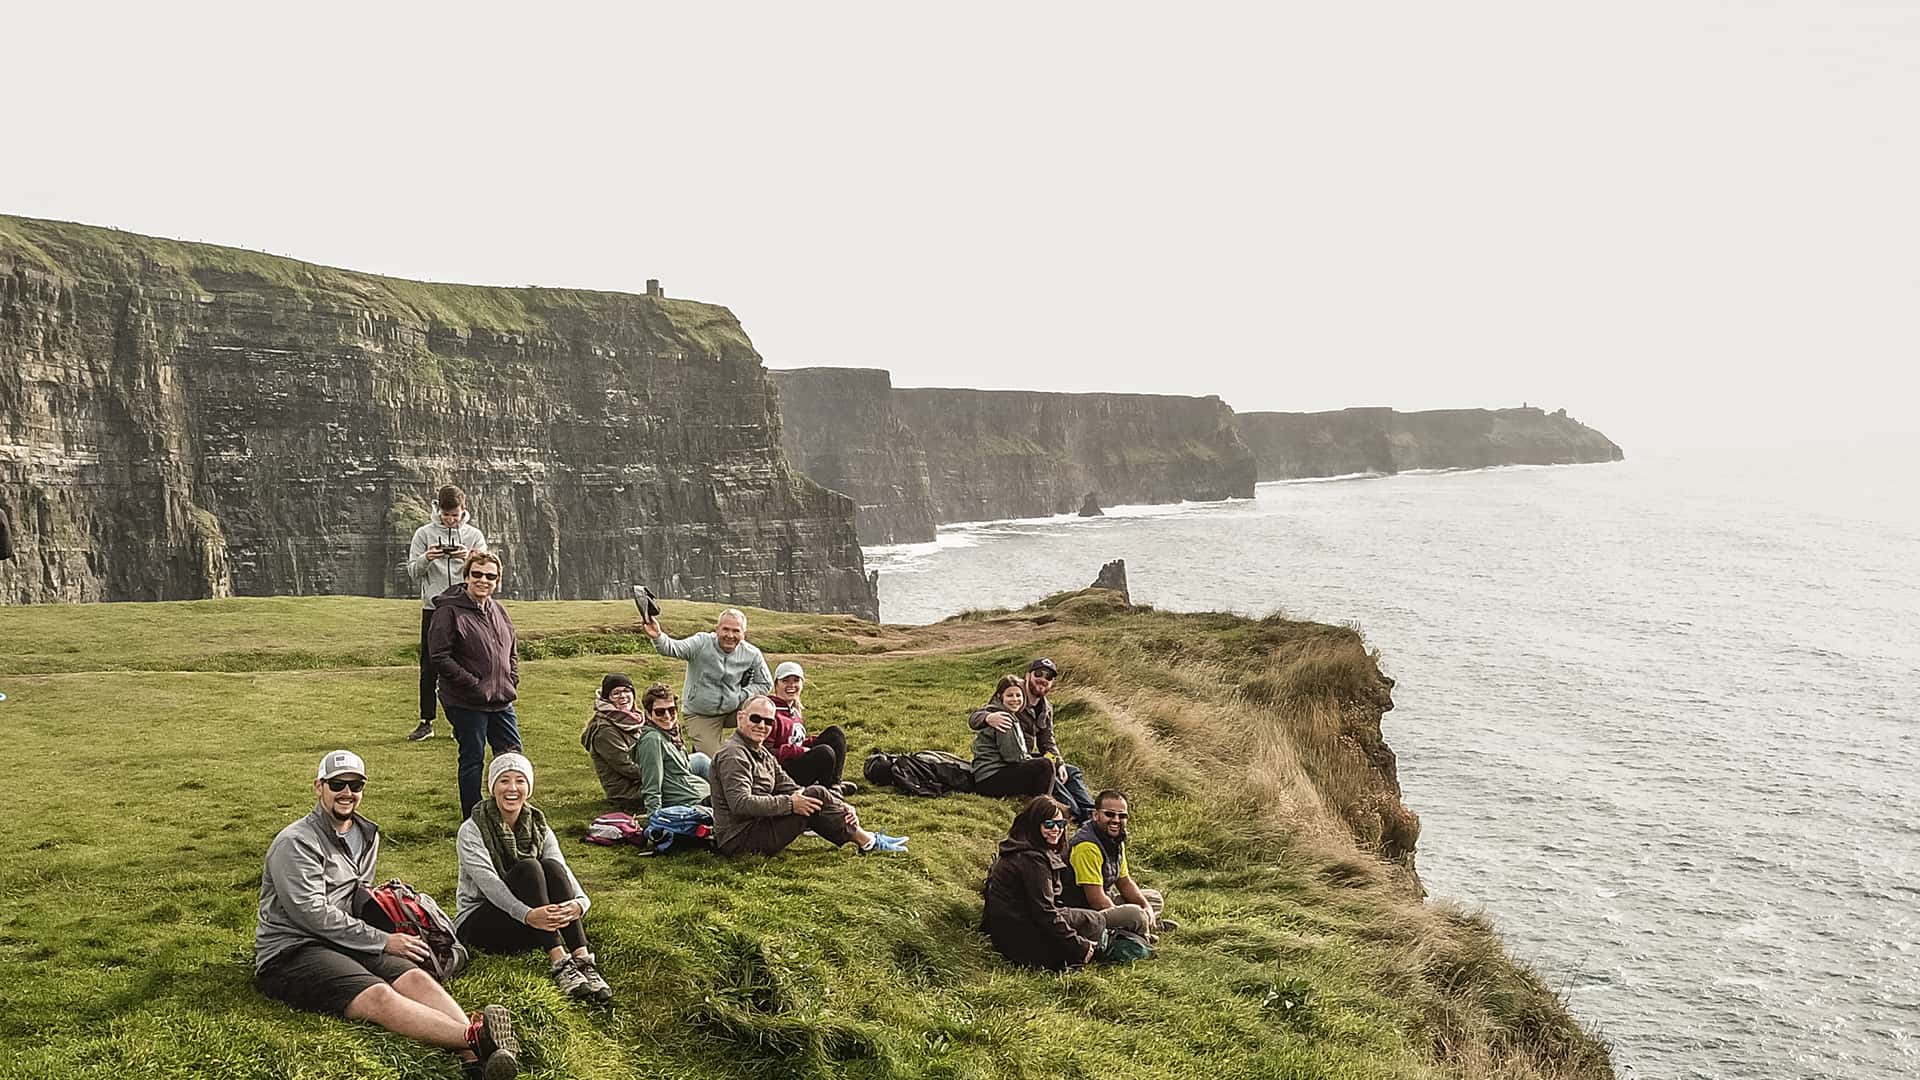 Group Chilling on Cliffs Photo